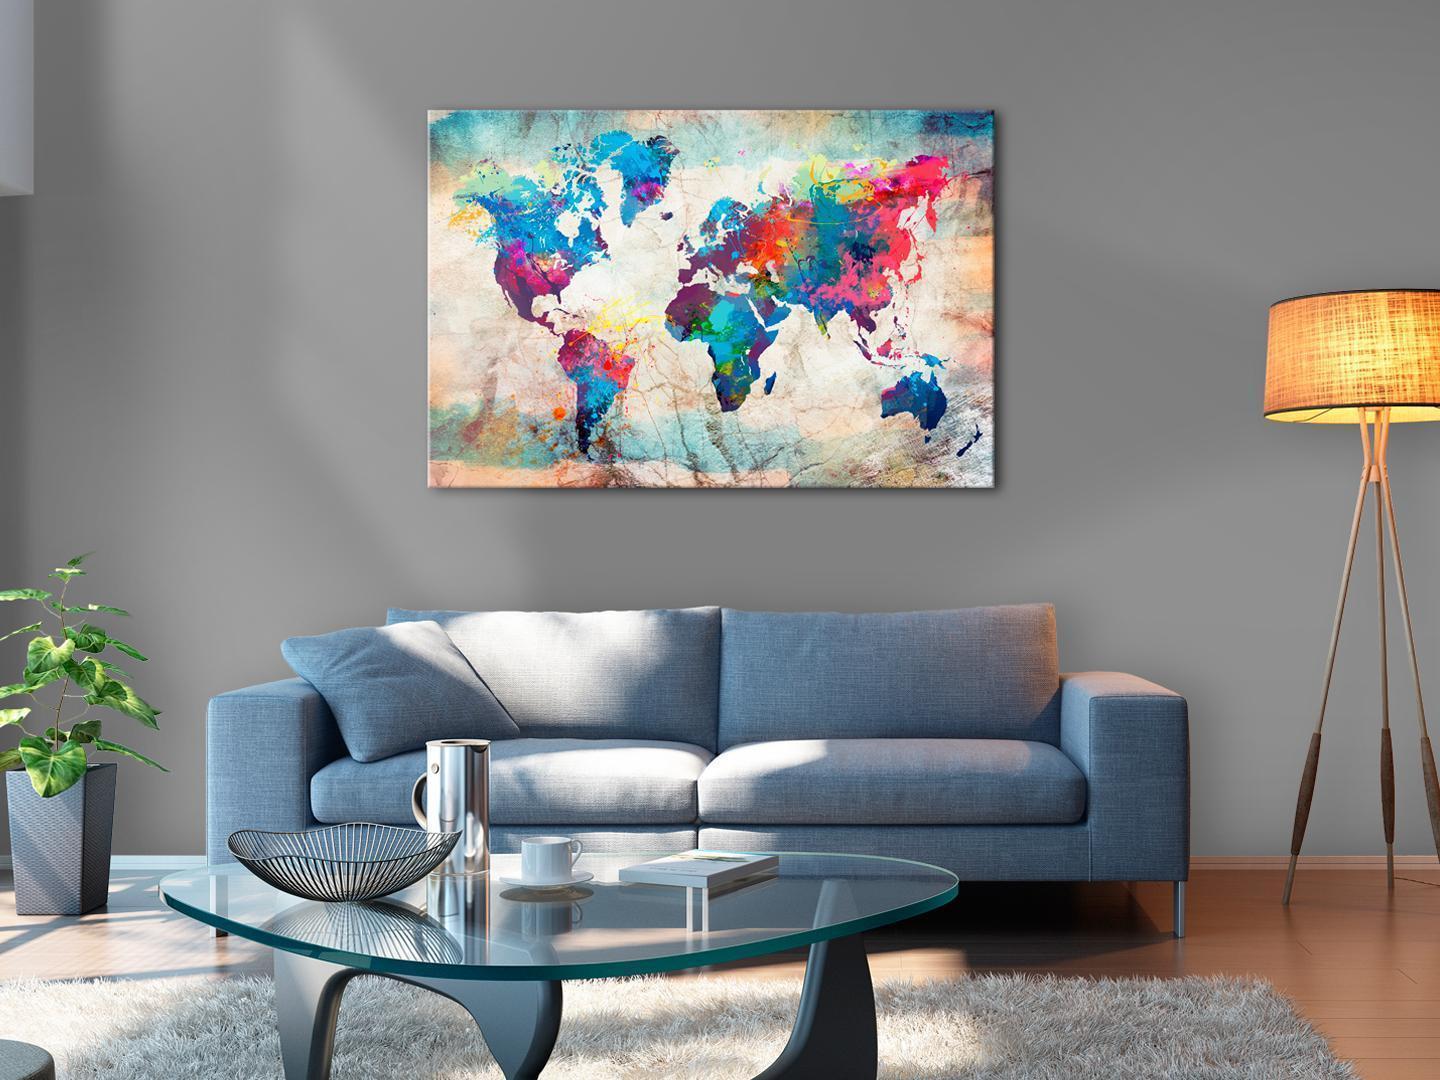 Painting - World Map: Colorful Madness